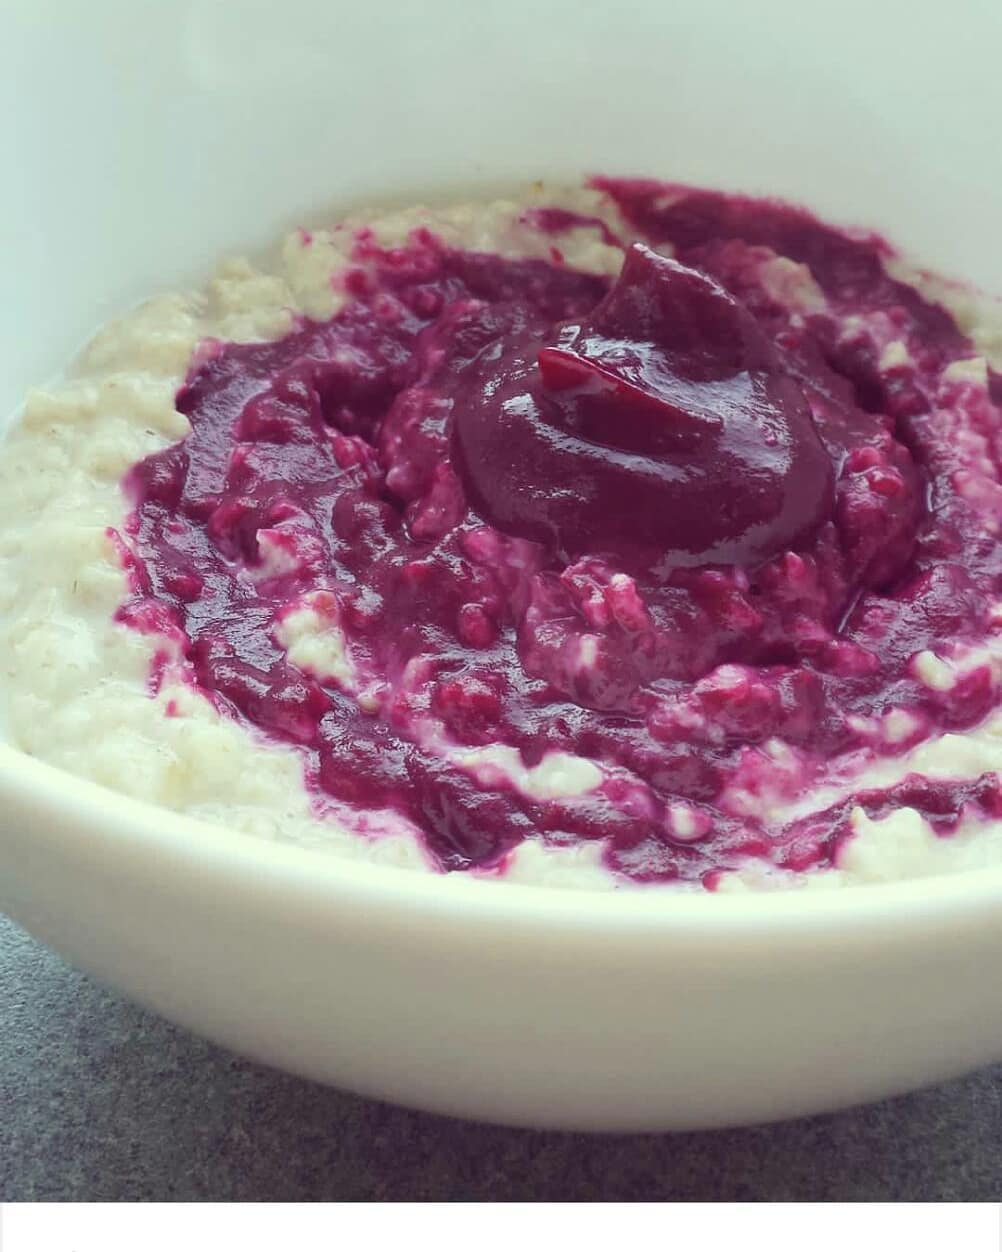 Porridge obsession. Topped with beetroot and Apple puree. #foodiefriday #food #porridge #breakfast #anytimefood #nutritionist #nutritionist #eatwell #healthyeating #health #healthylifestyle #healthyliving #beetroot #apple #fitness